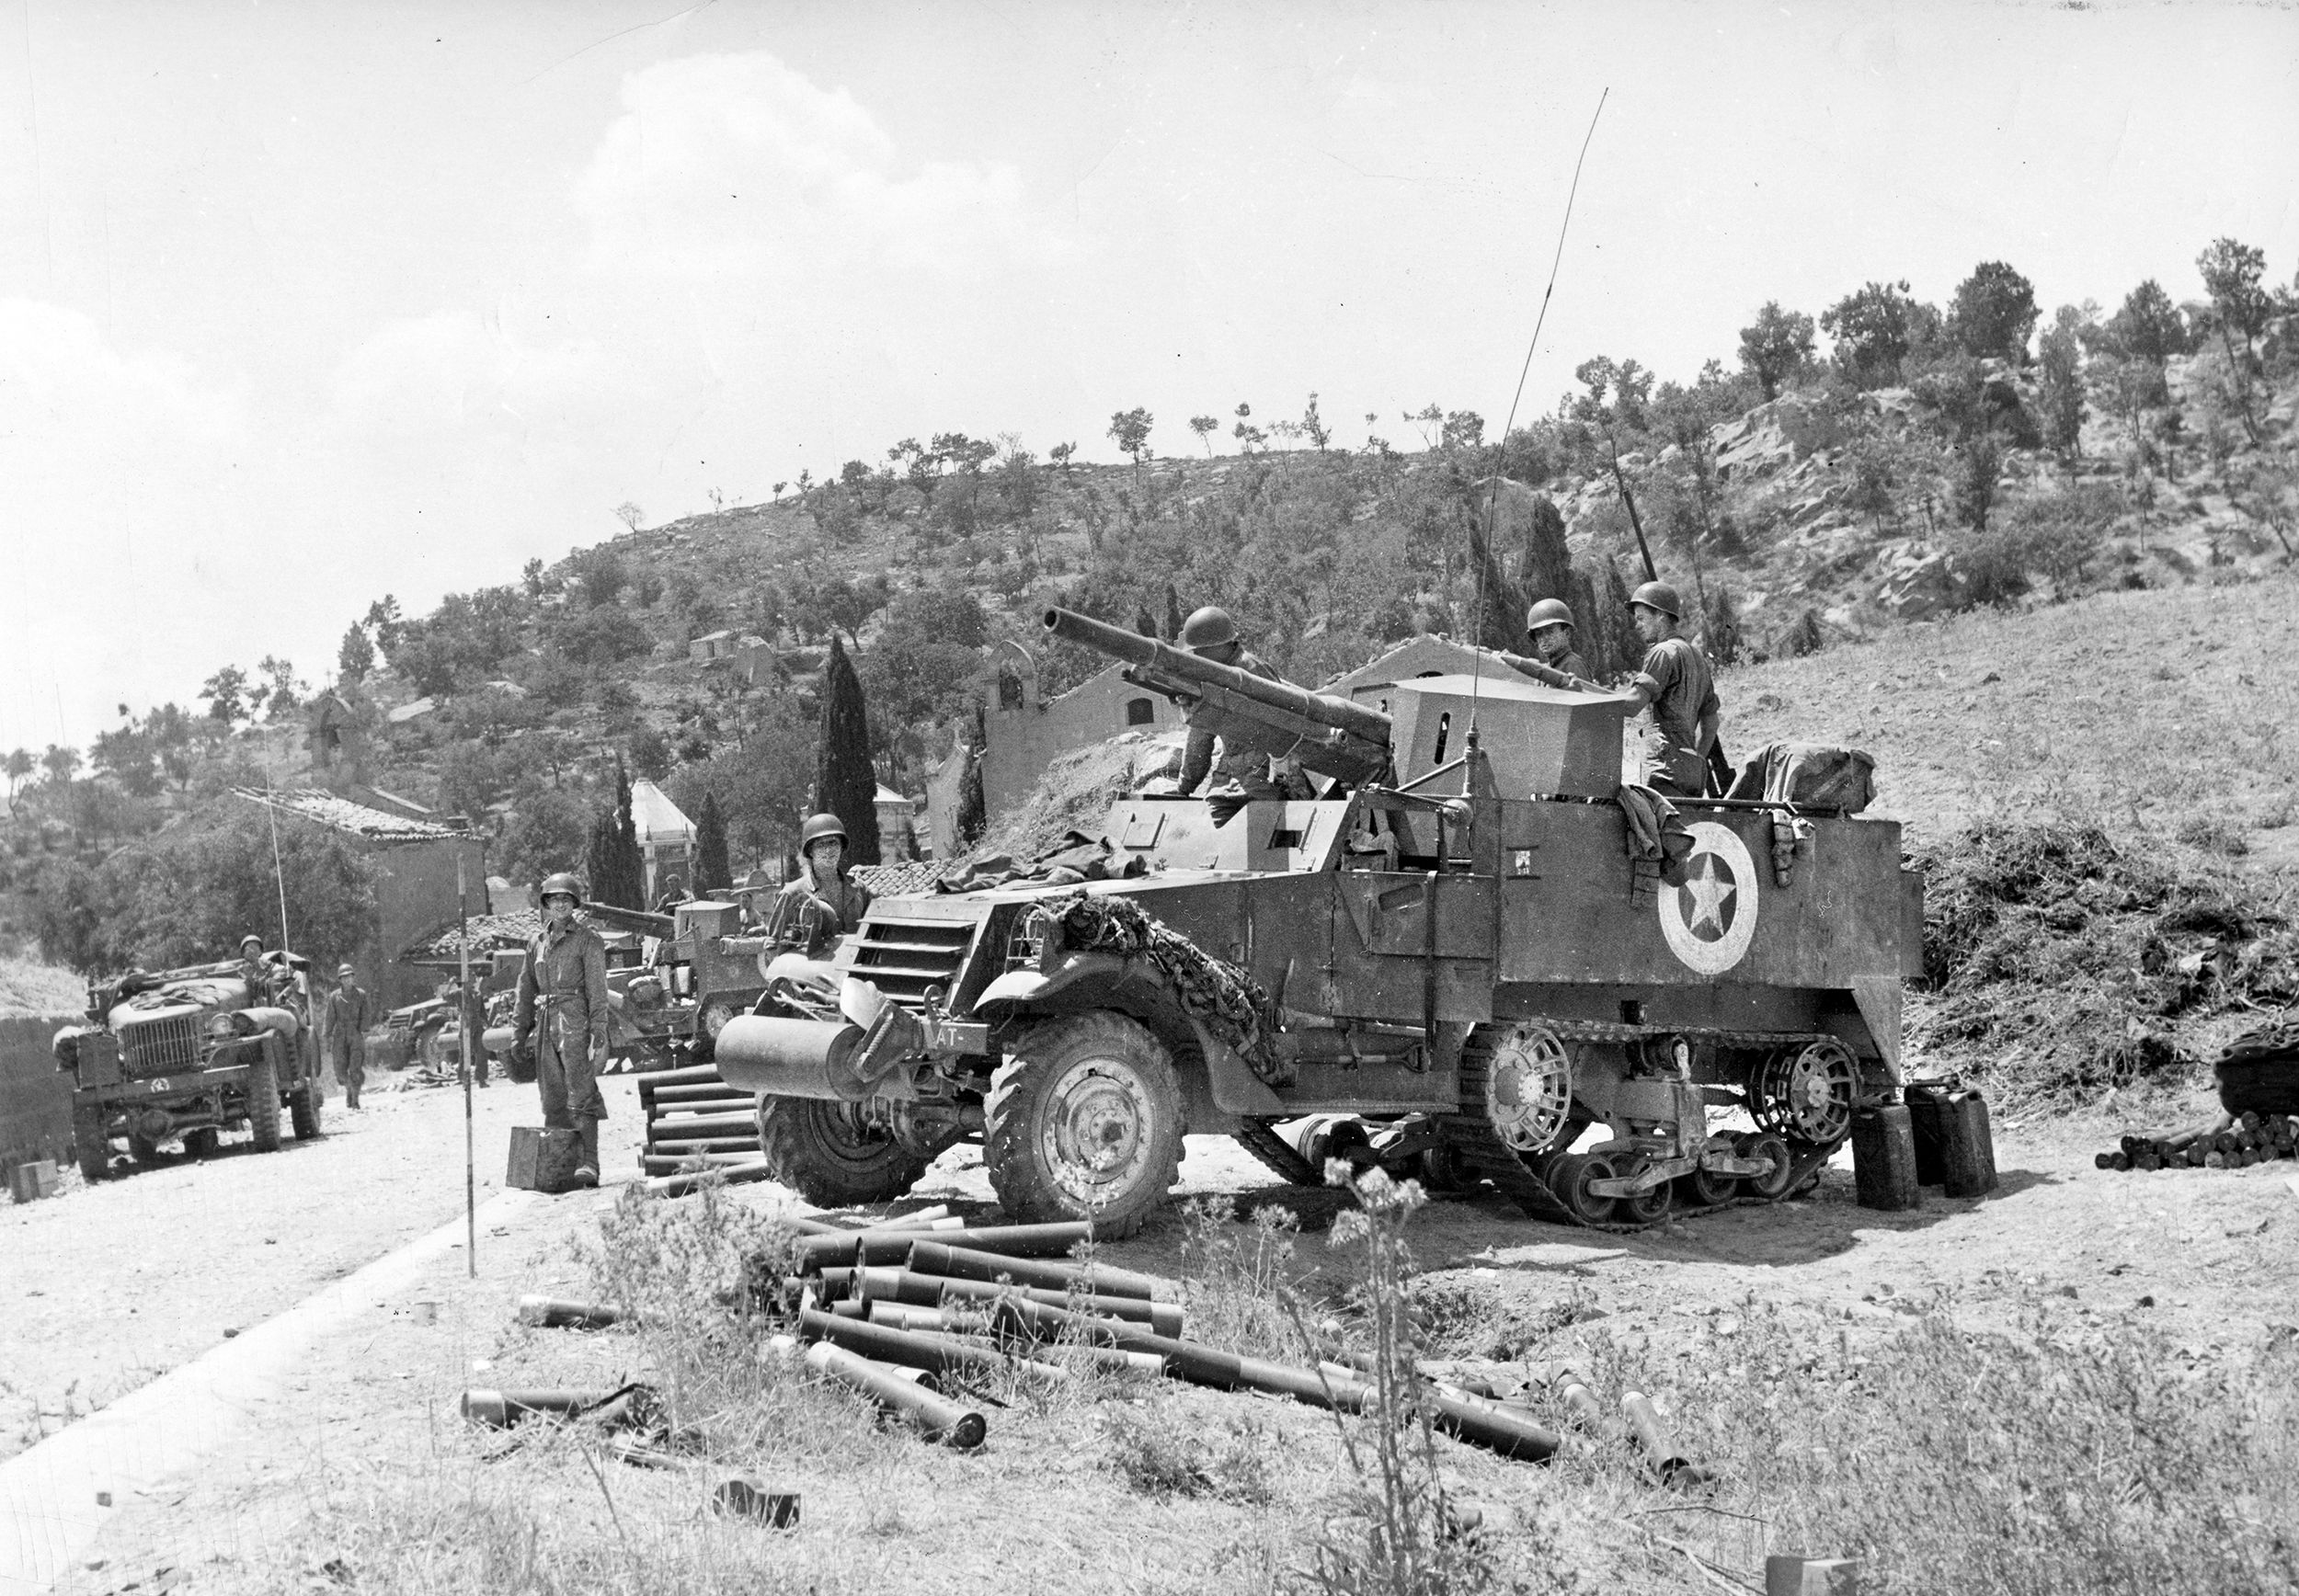 The crew of a self-propelled 75mm gun motor carriage awaits orders to go into action during the 1st Division’s assault on Troina, August 7, 1943. The tough, nearly week-long battle cost Terry Allen his command.